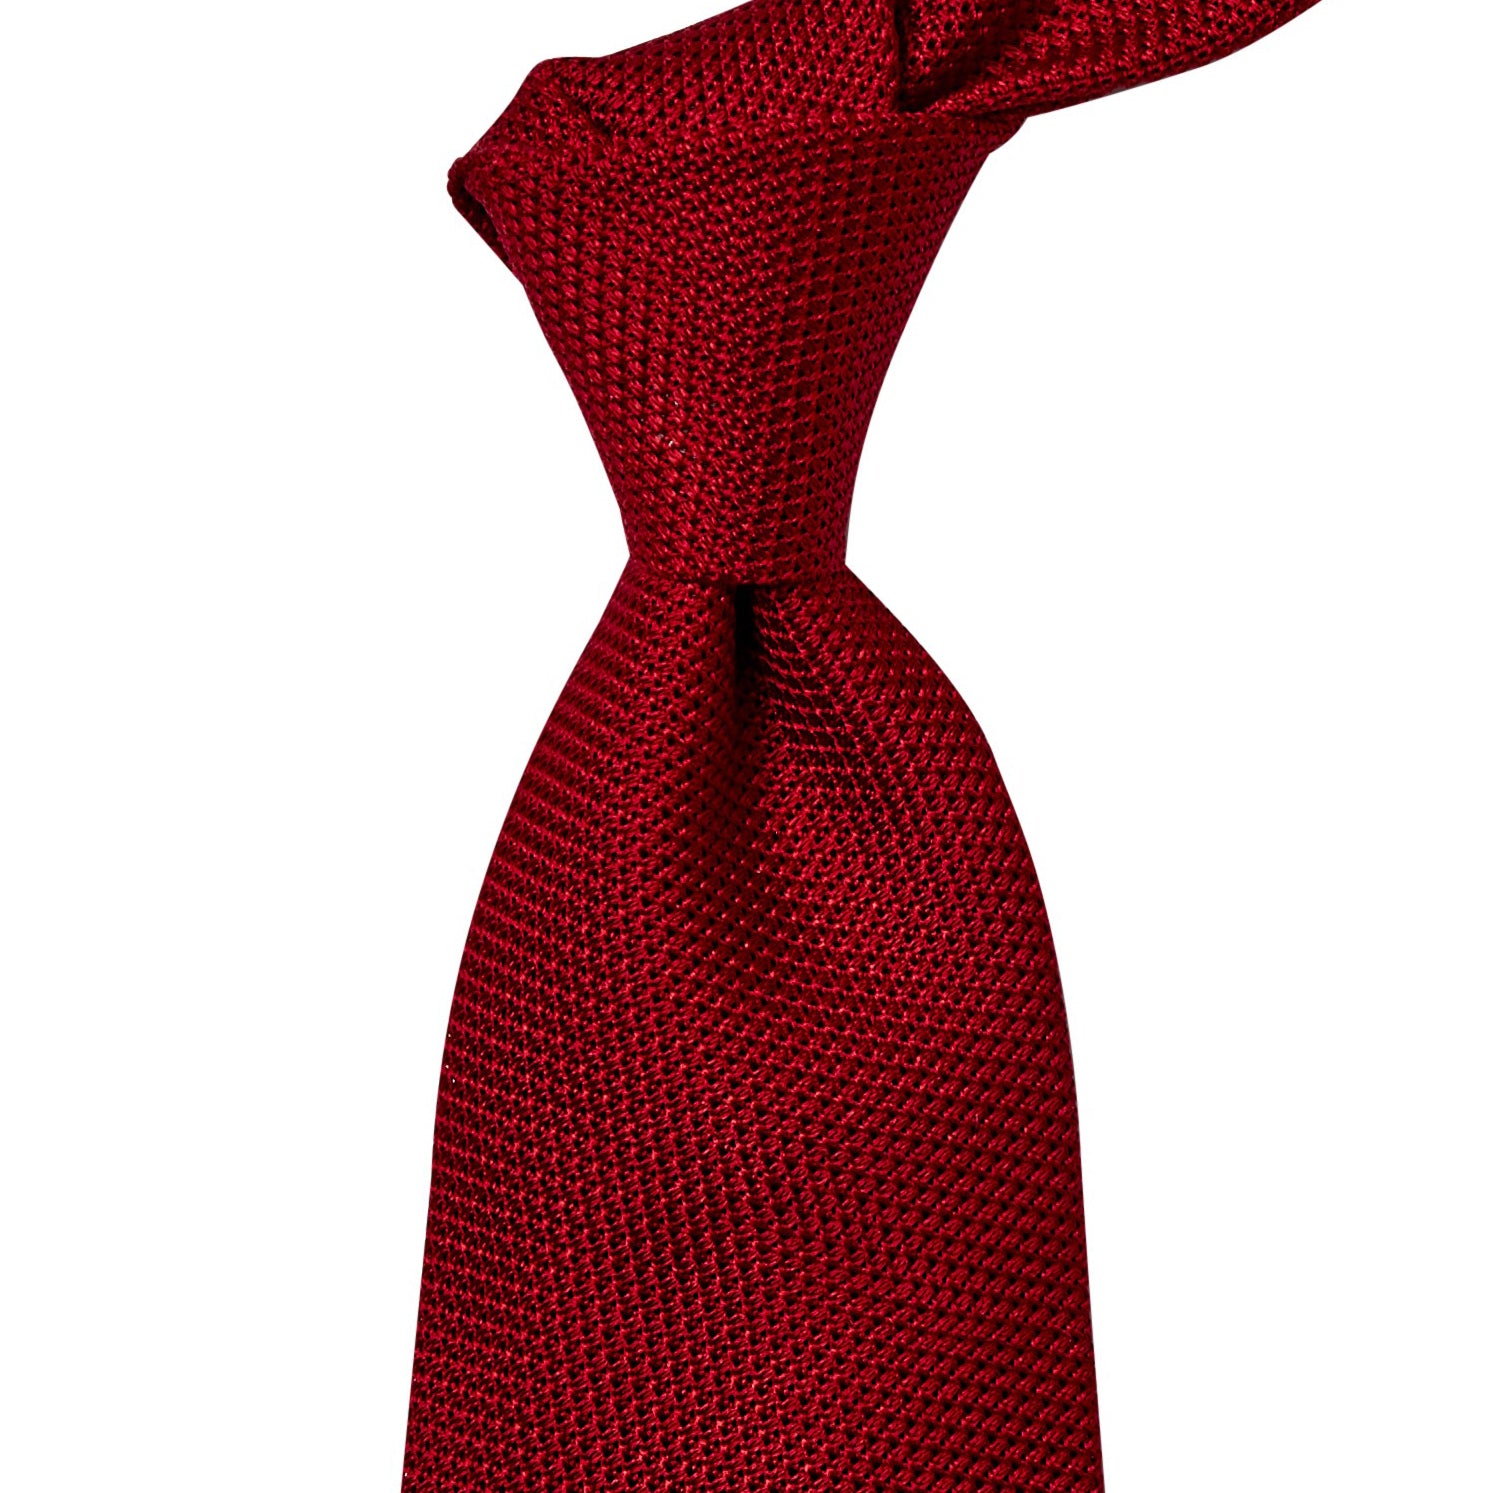 A Sovereign Grade Grenadine Fina Red Tie from KirbyAllison.com, handmade in the United Kingdom, on a white background.